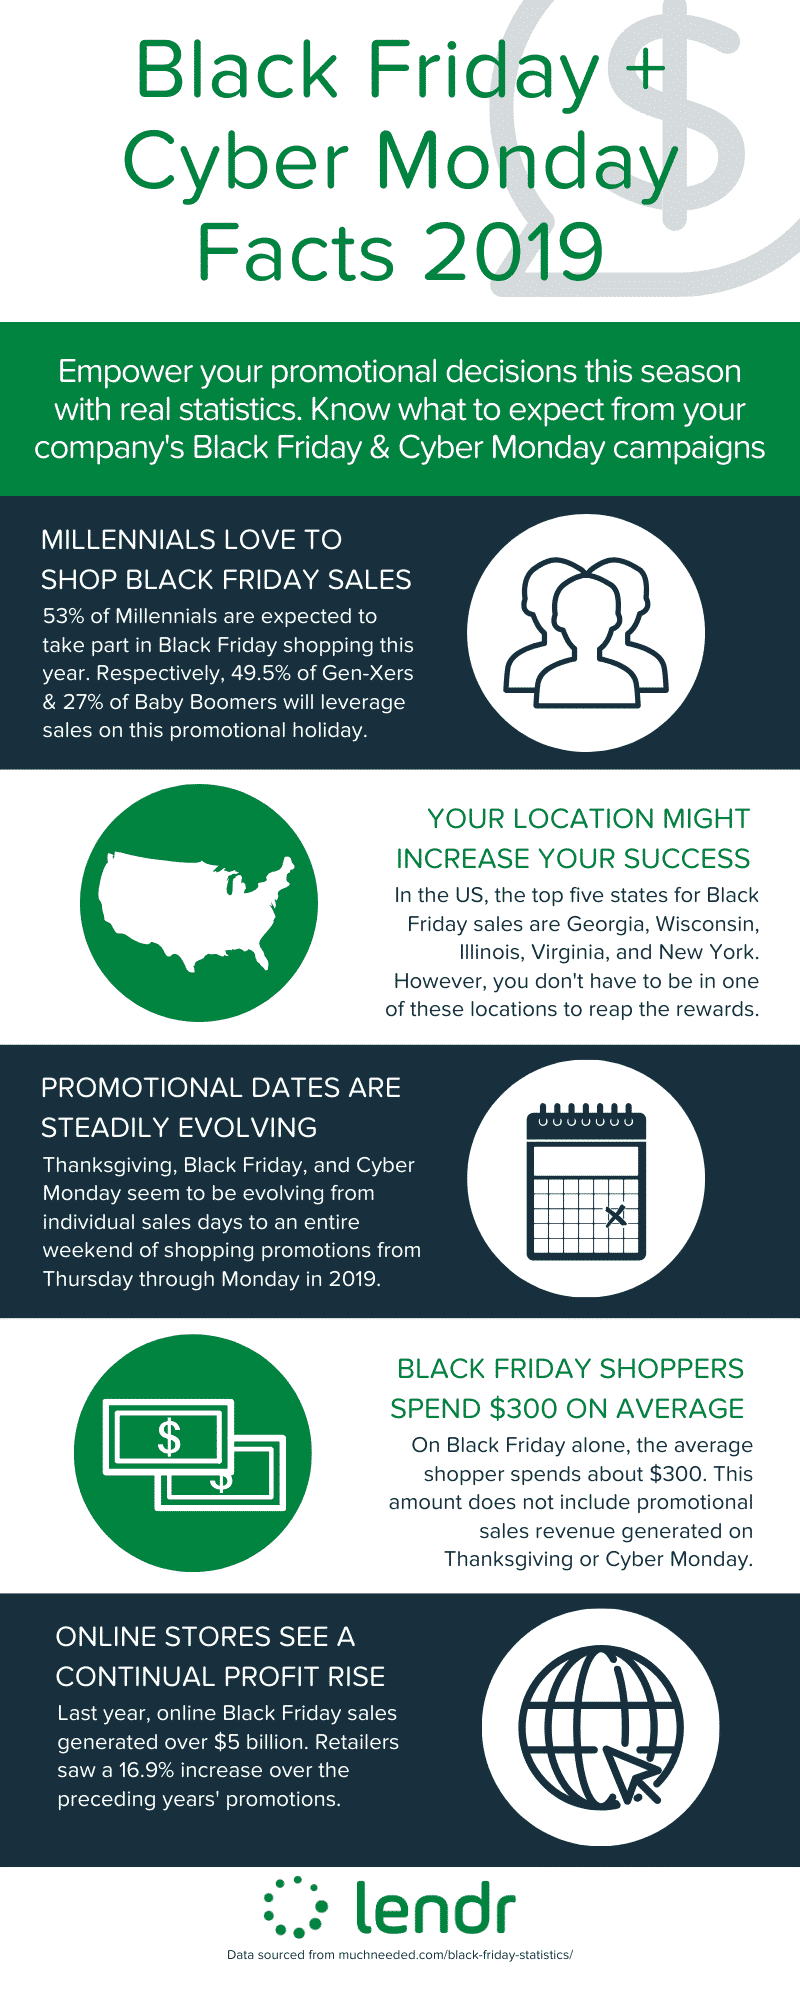 Black Friday and Cyber Monday Facts 2019